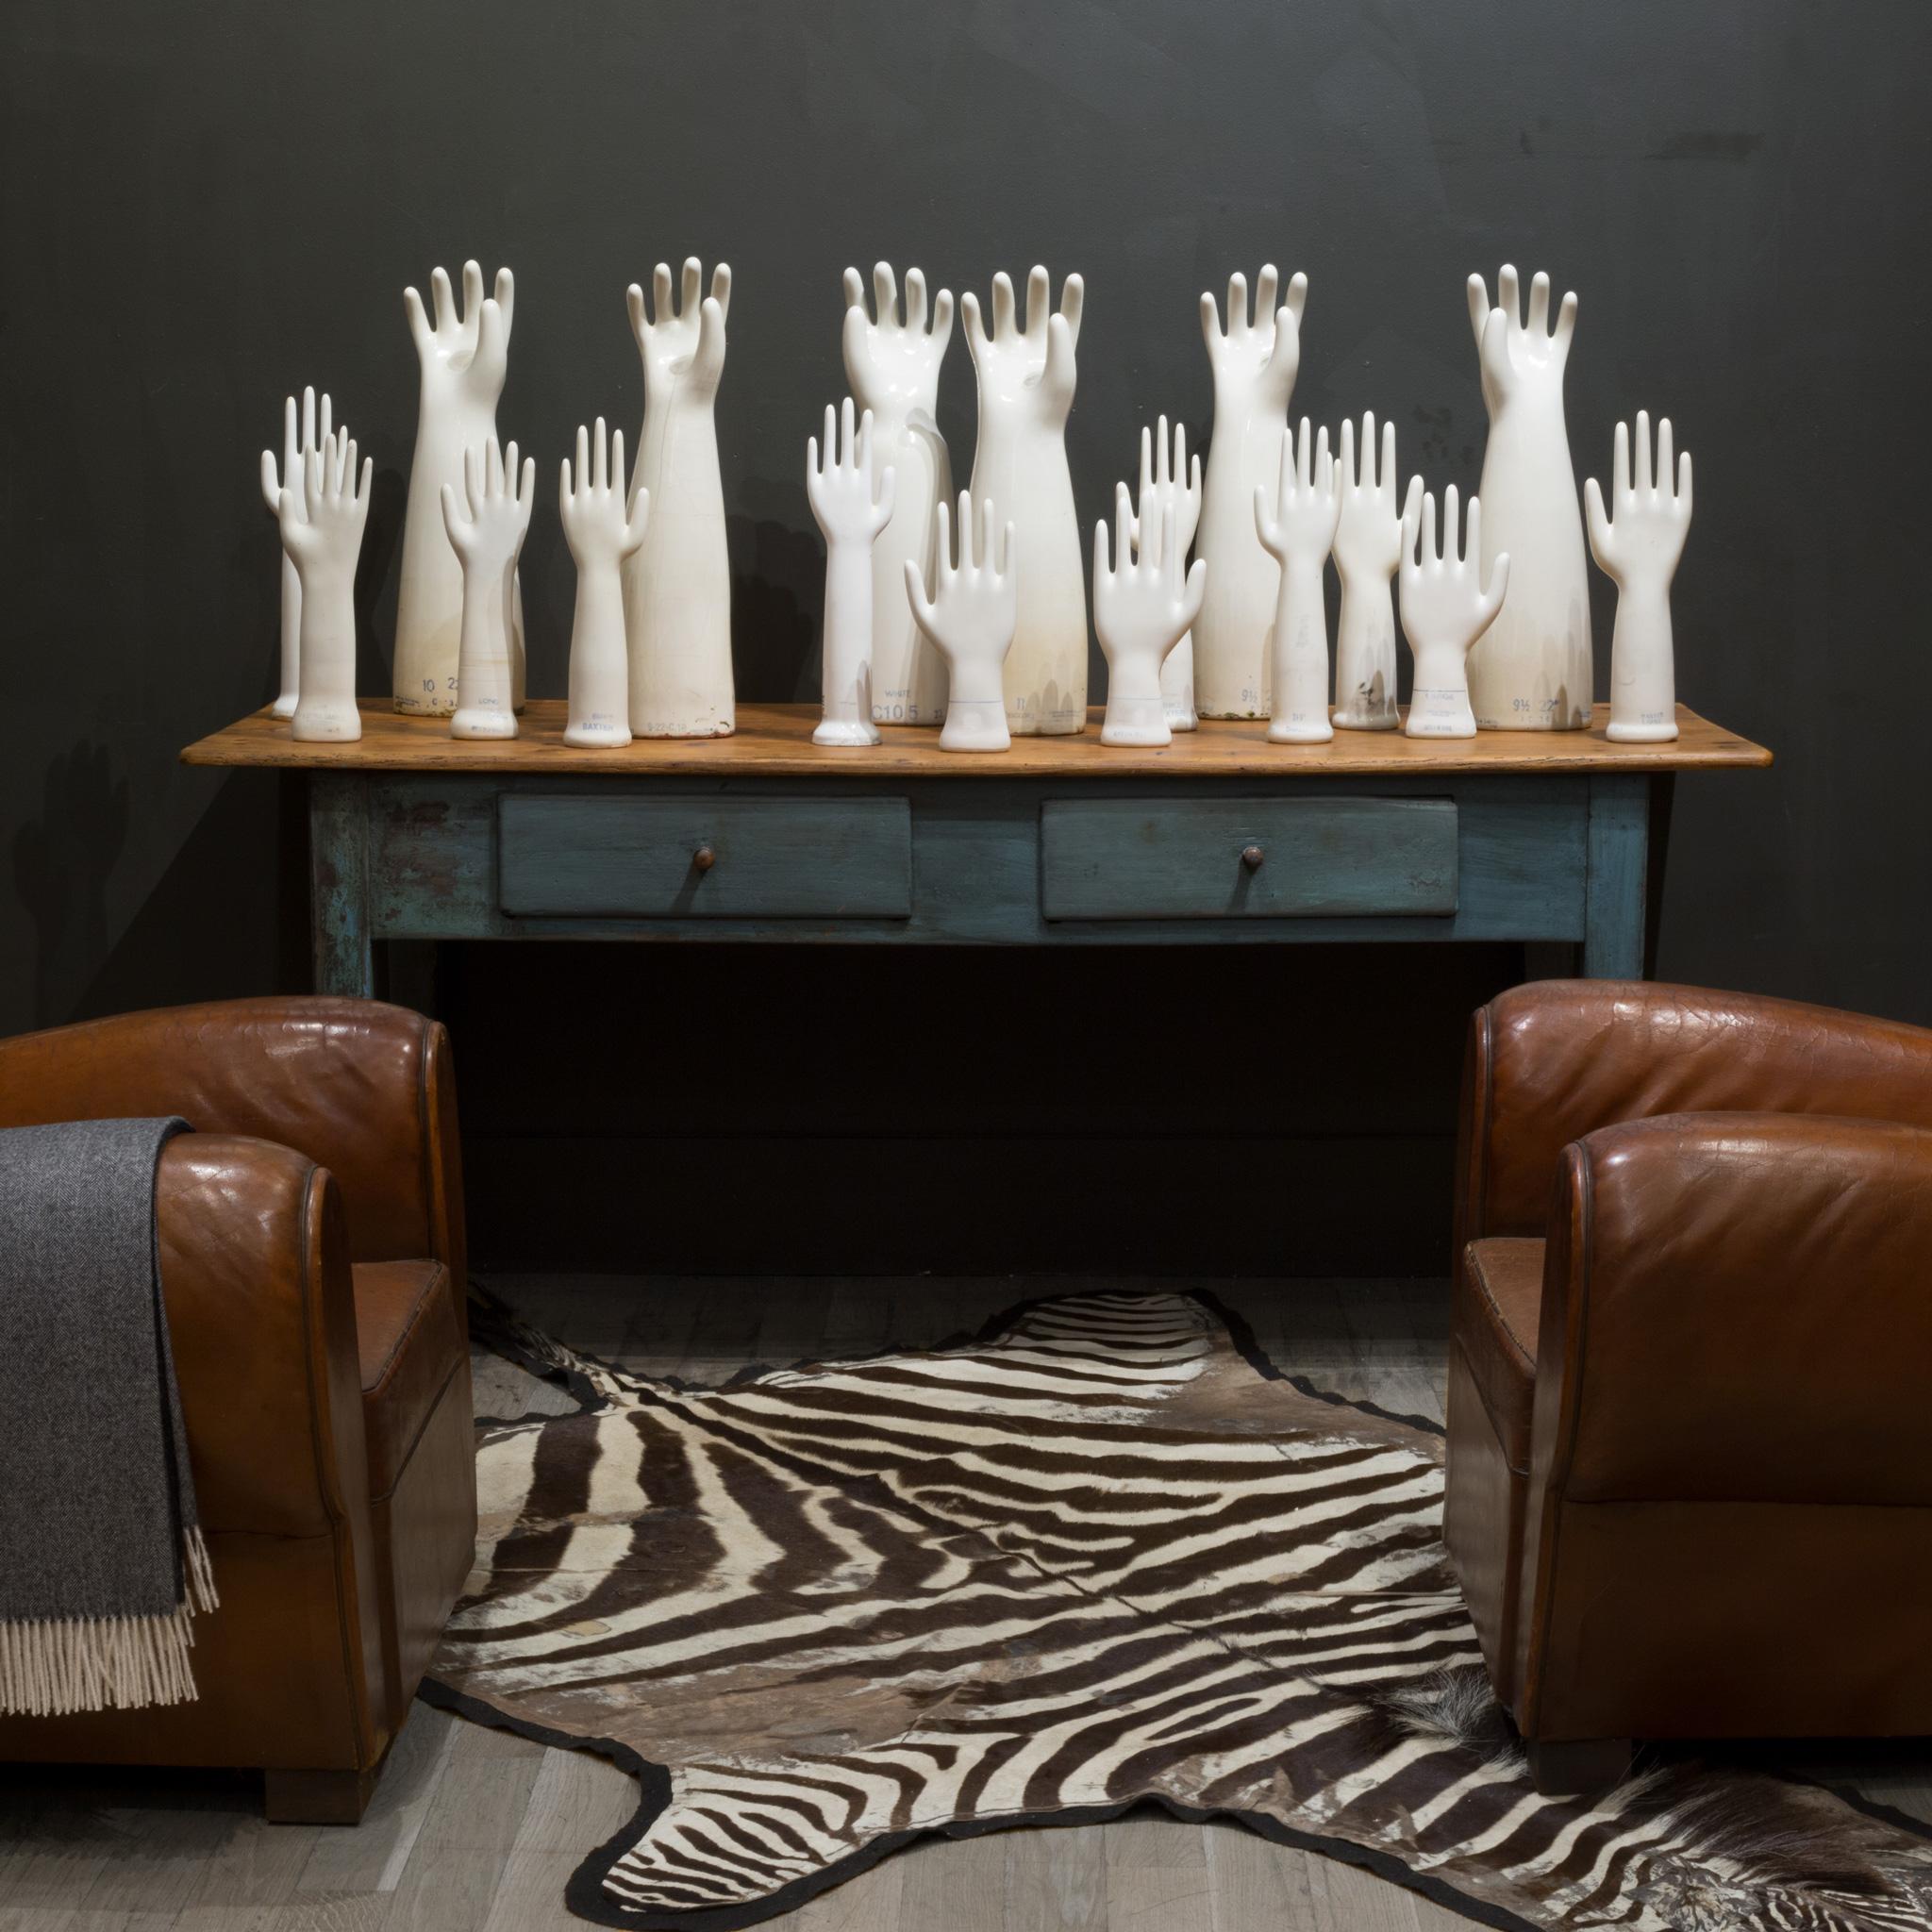 ABOUT

Price is per piece. Six extra large molds, four large, and eight medium molds available. See S16 Home San Francisco. 

Original West German glazed porcelain factory rubber glove molds with textured fingers. Each is stamped with the size